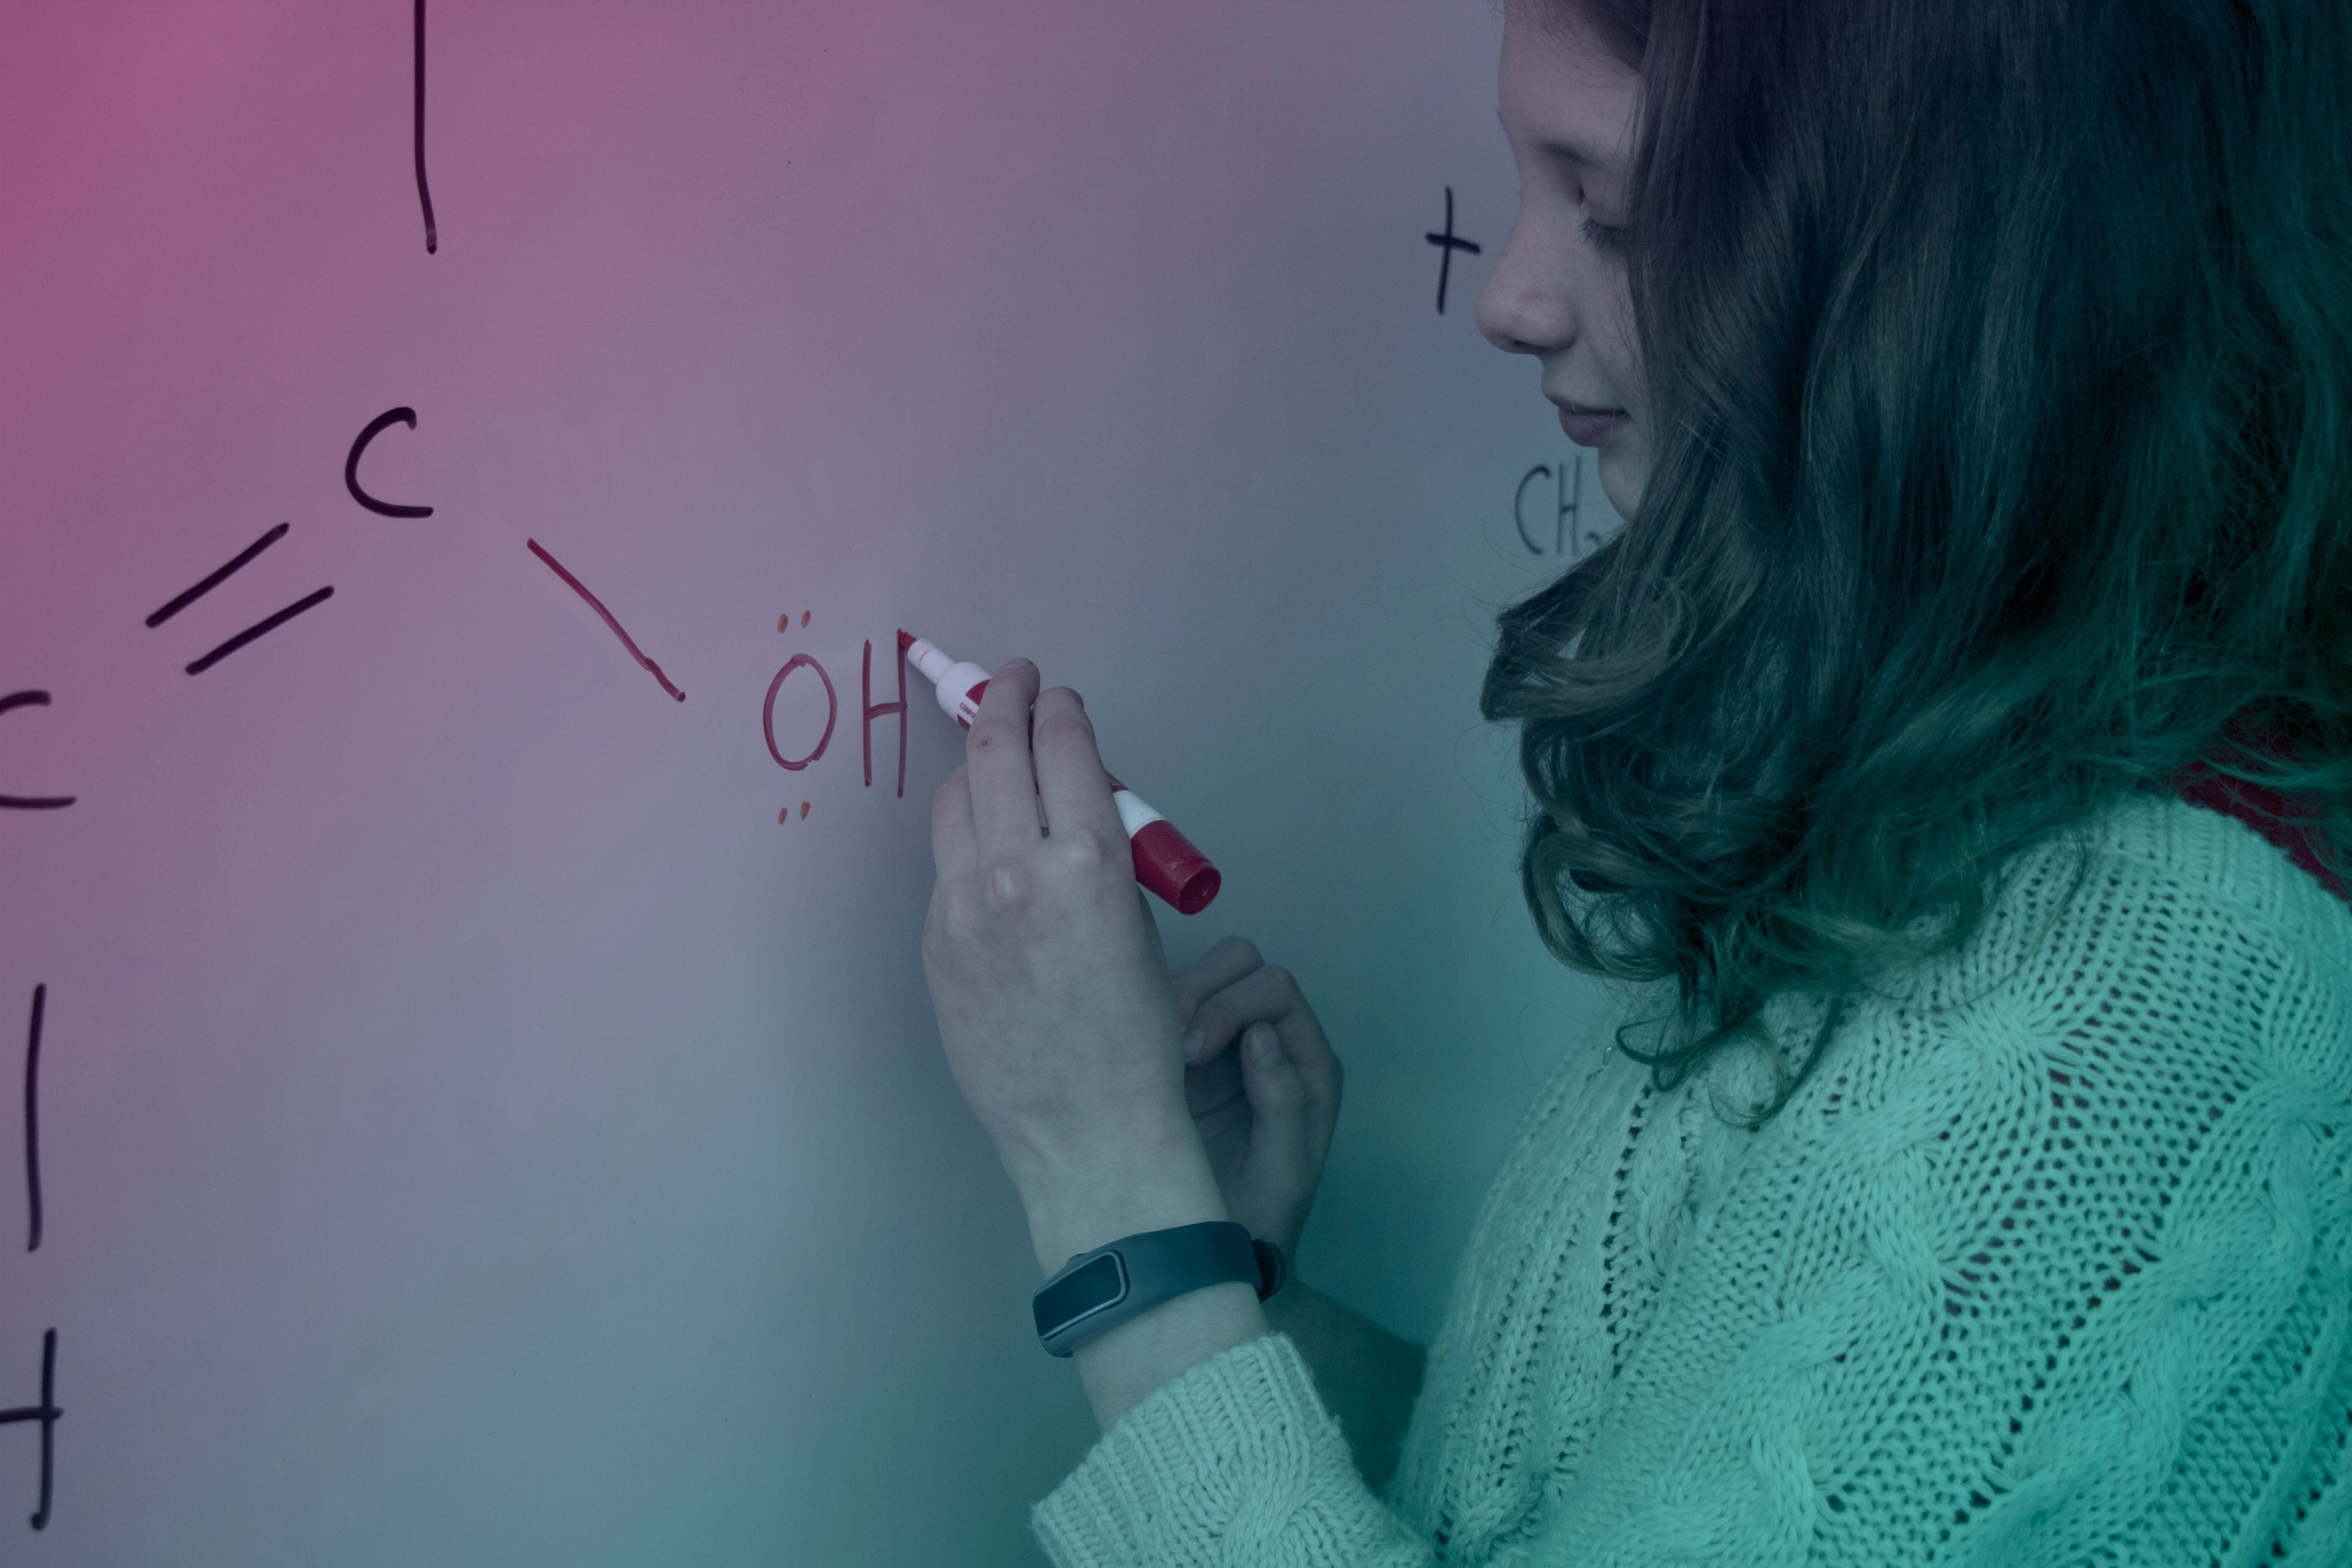 A girl writing on a whiteboard with a marker.